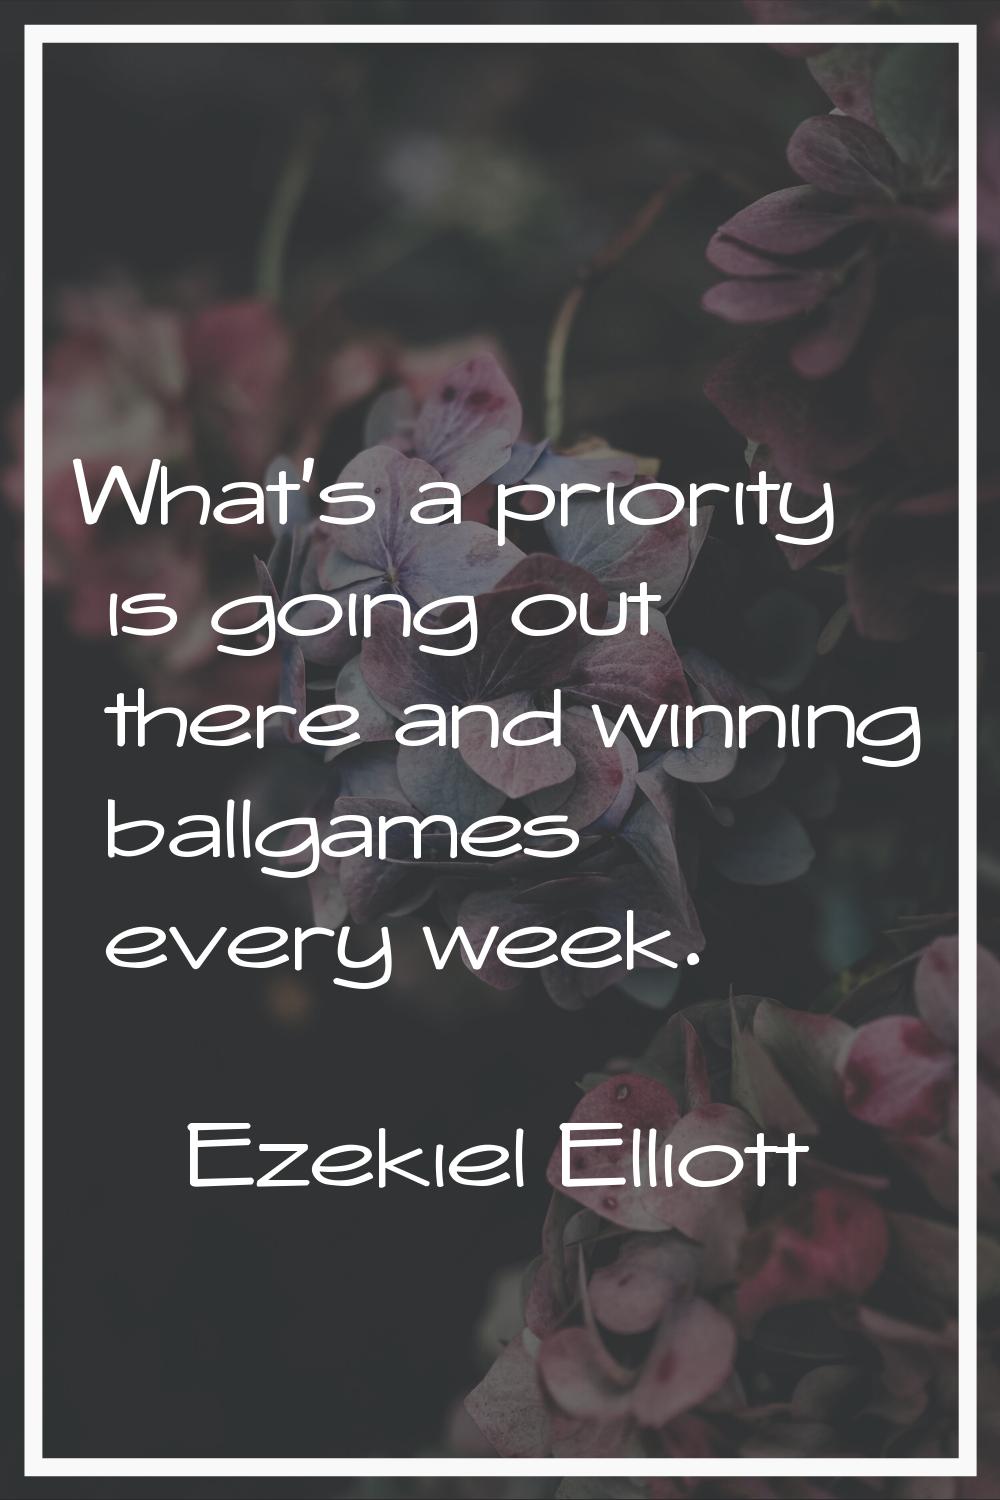 What's a priority is going out there and winning ballgames every week.